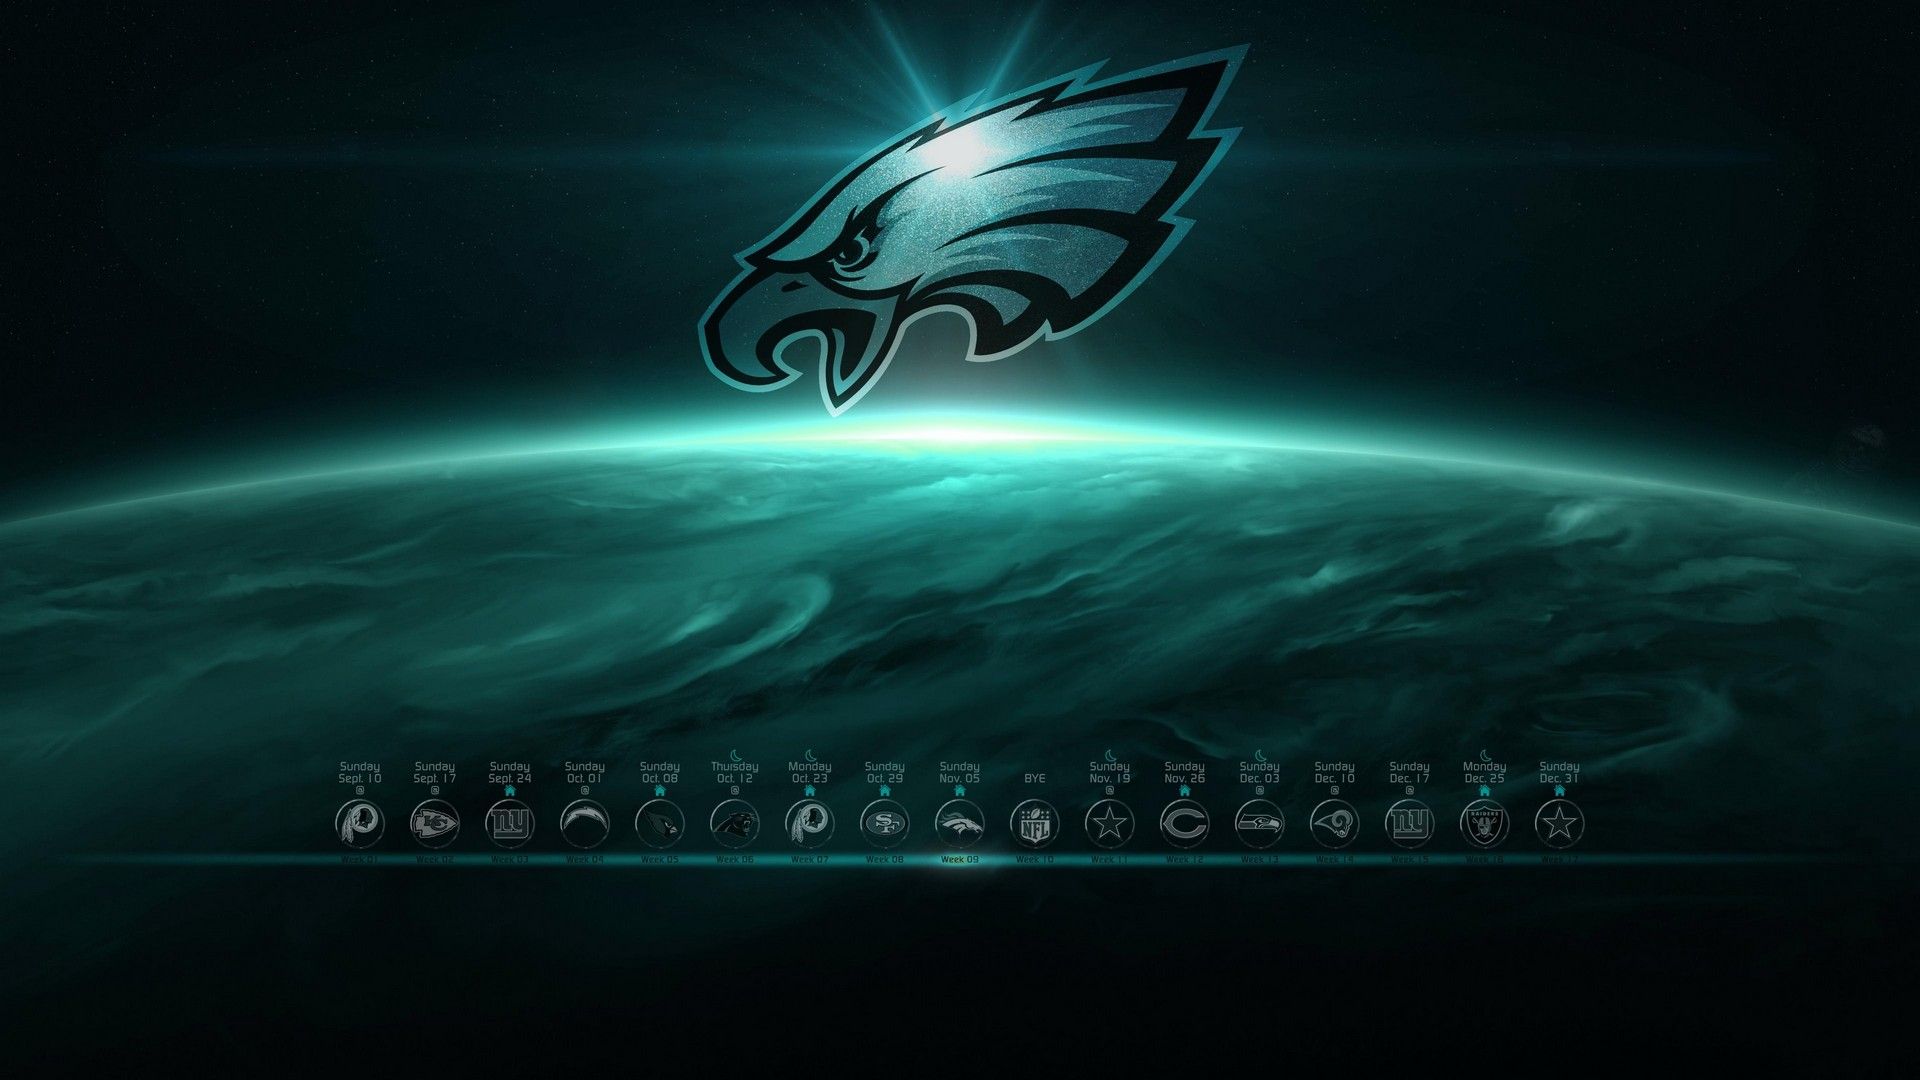 Nfl Eagles Wallpaper For Mac Background Football